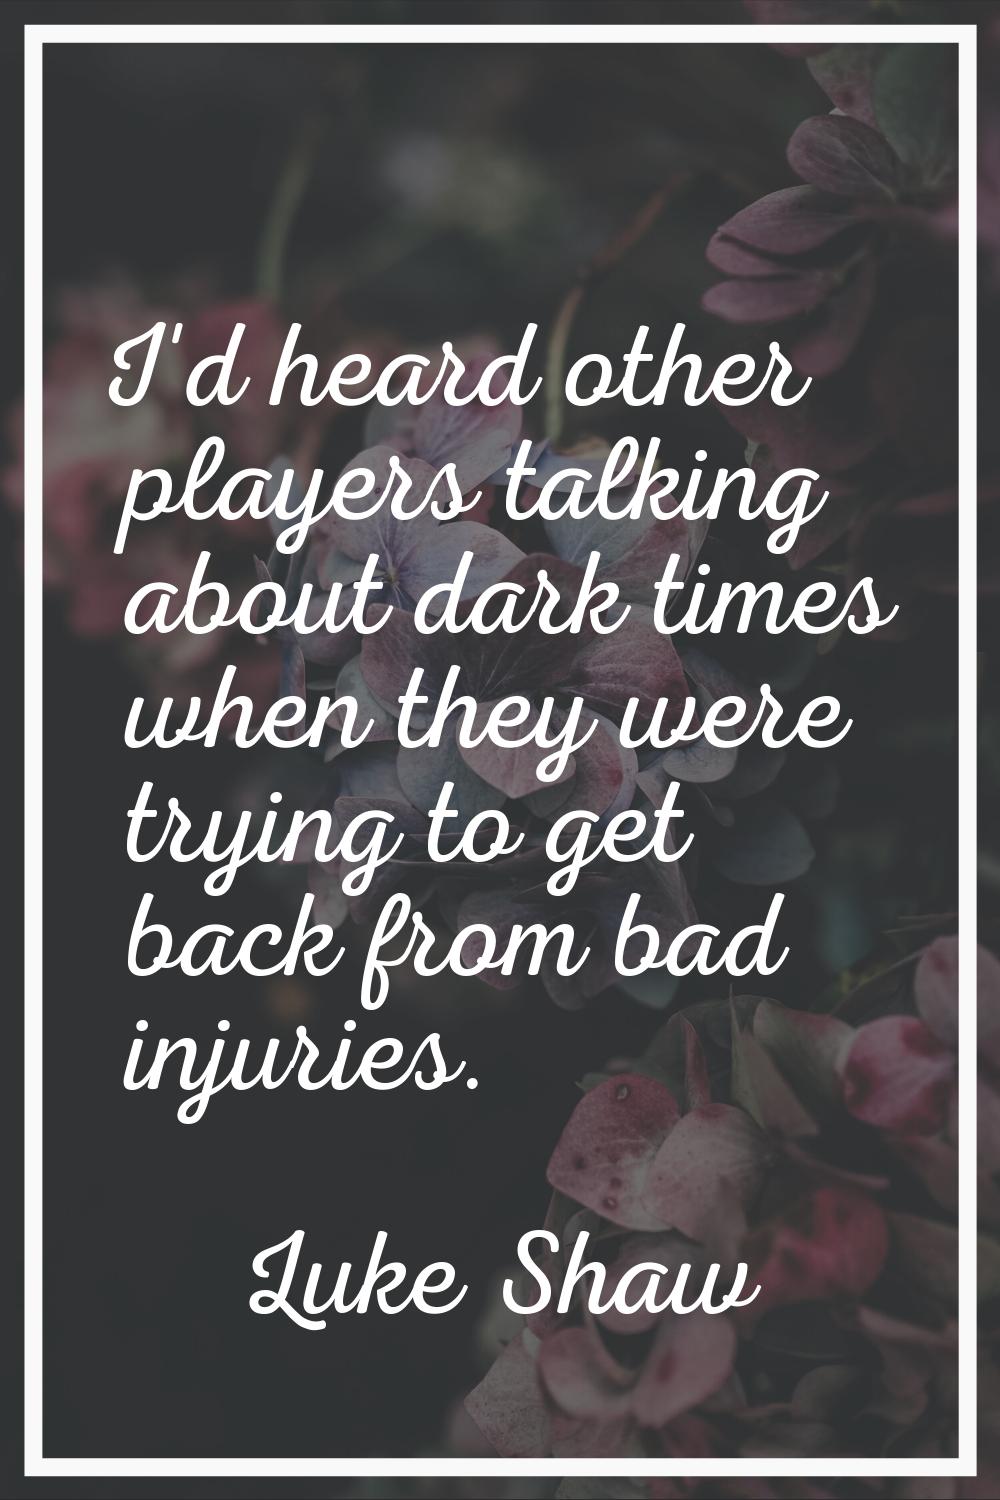 I'd heard other players talking about dark times when they were trying to get back from bad injurie